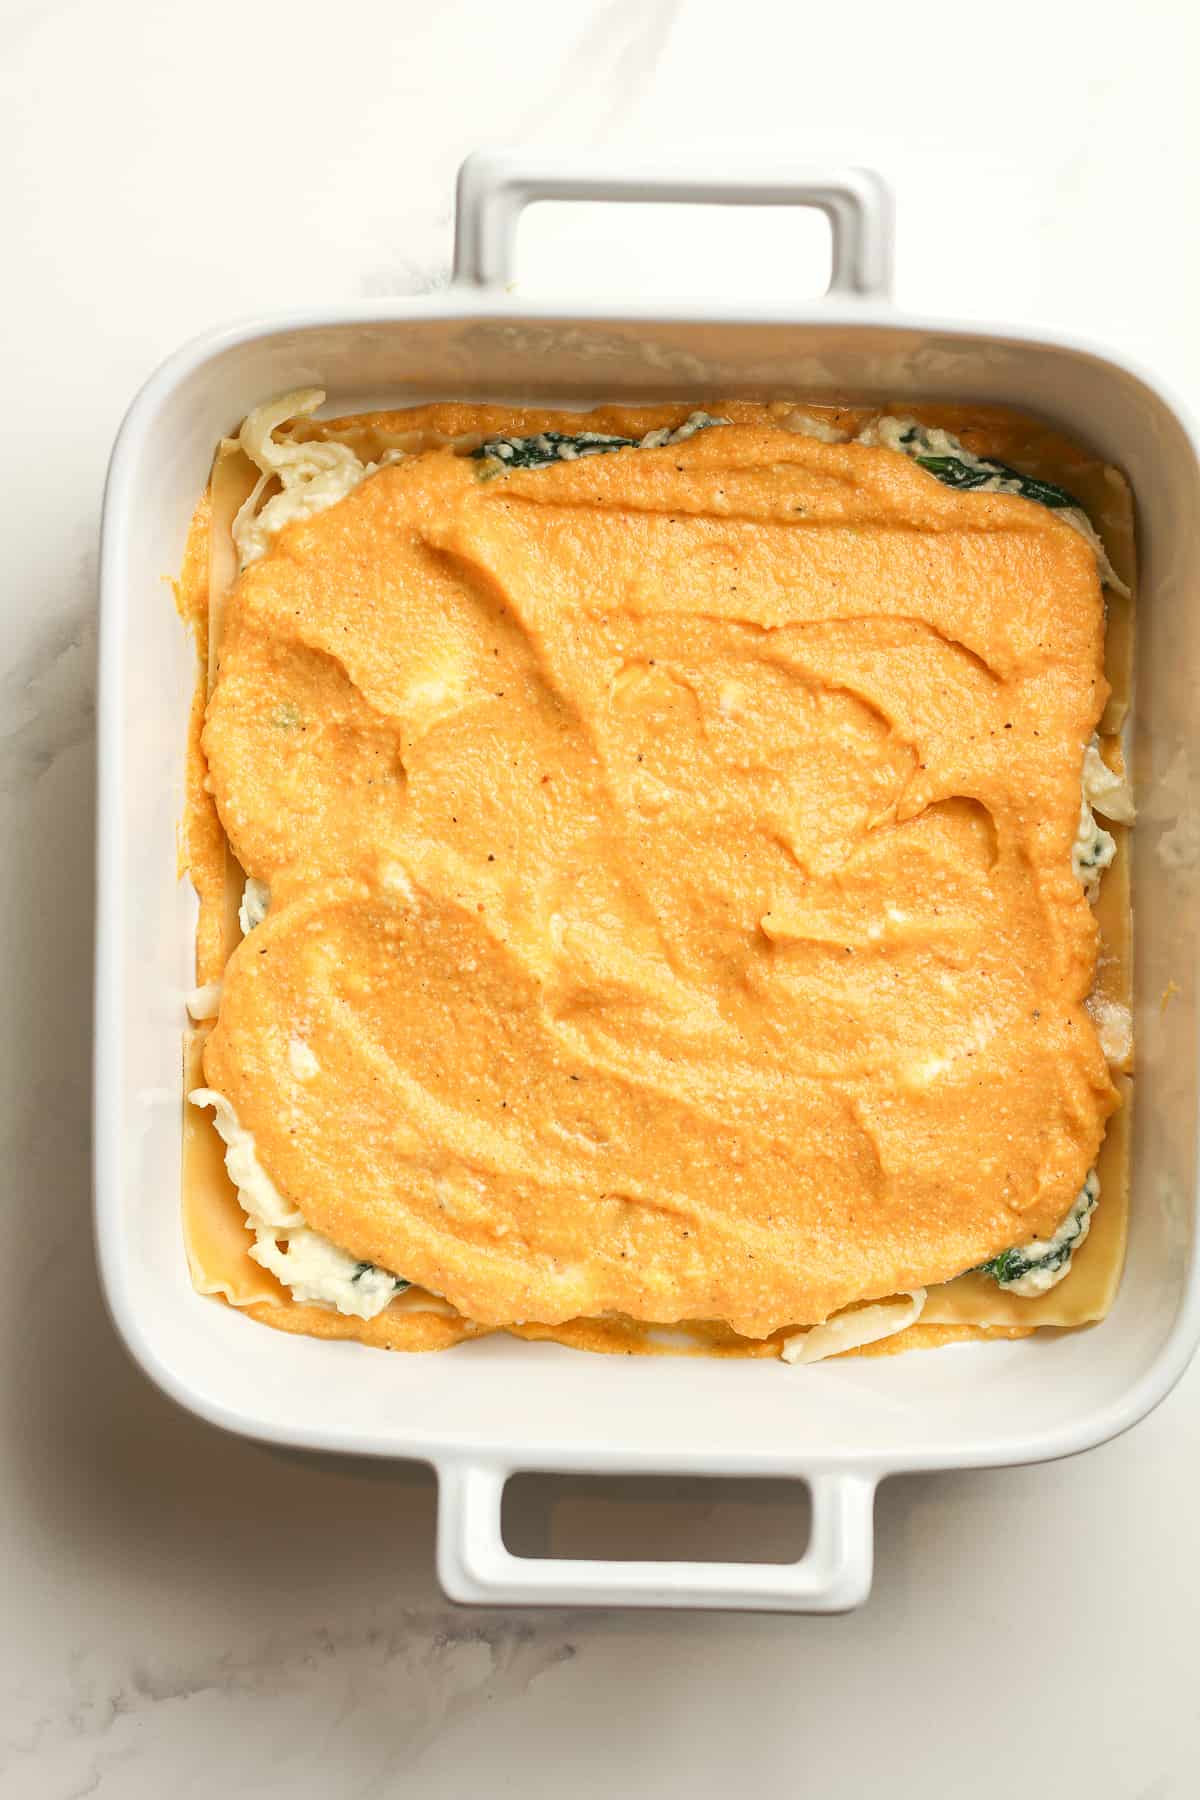 The layers of lasagna, showing the pureed squash layer.